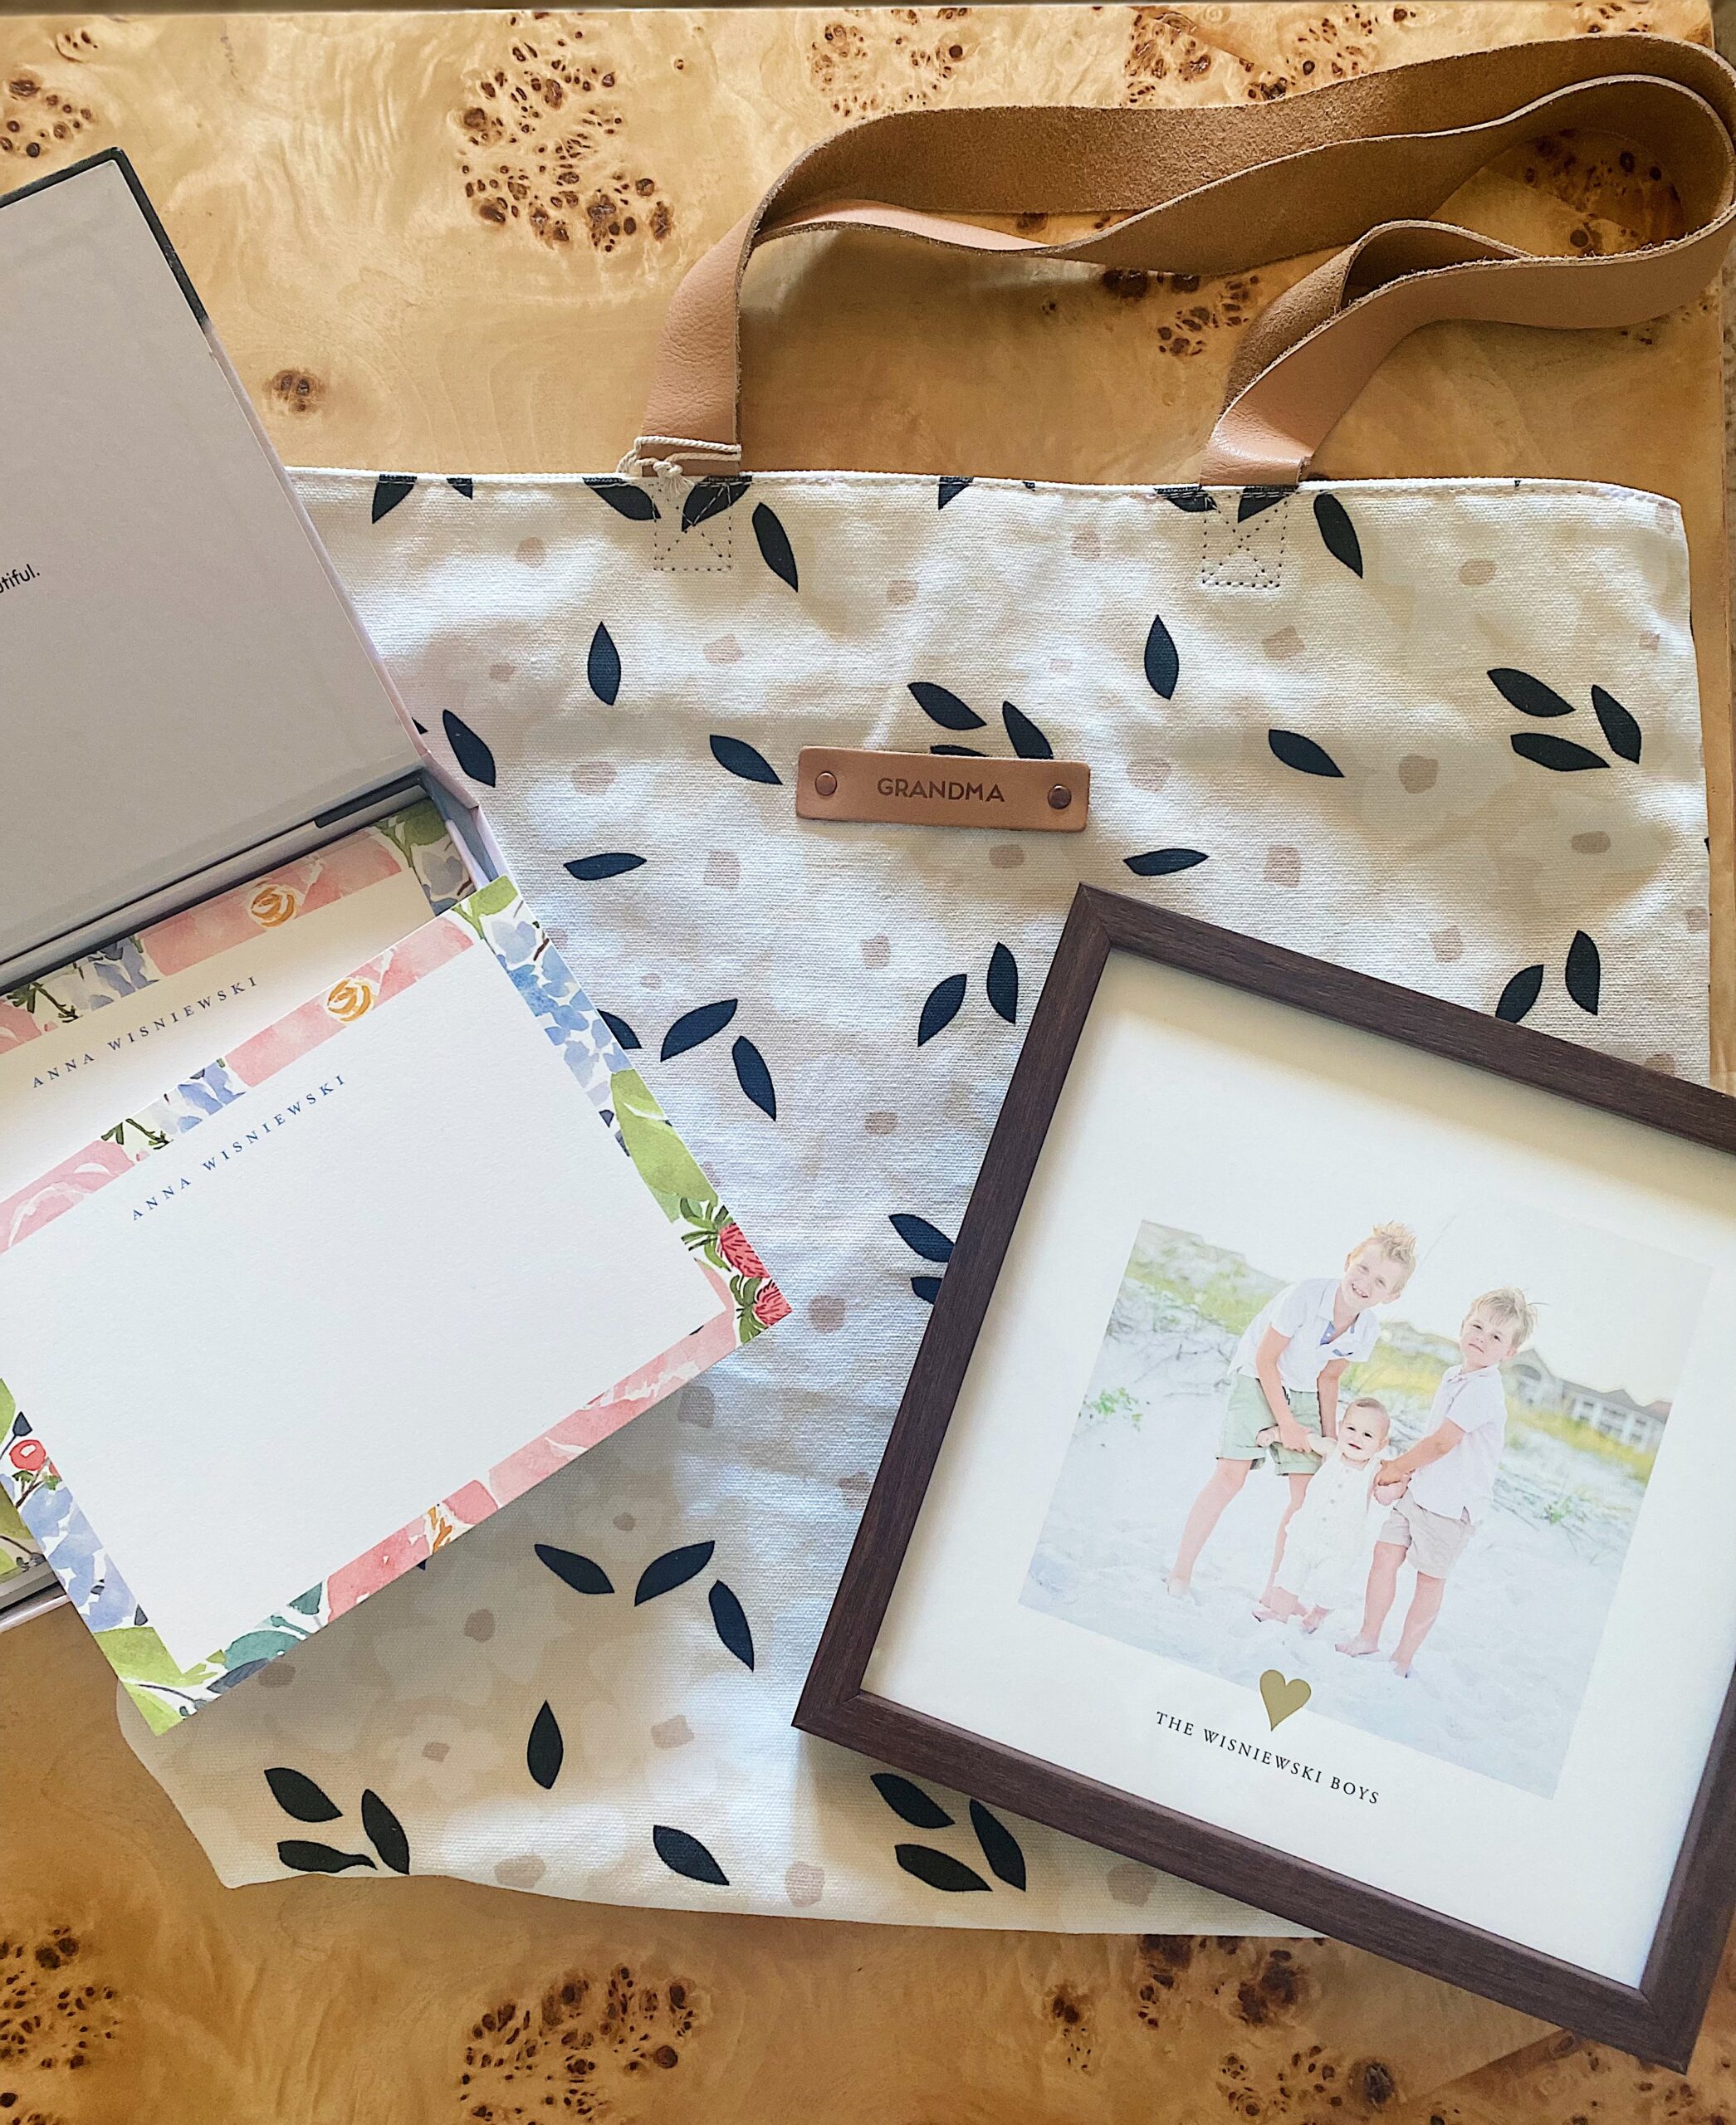 Sentimental Mother's Day Gifts with bag and picture frame 